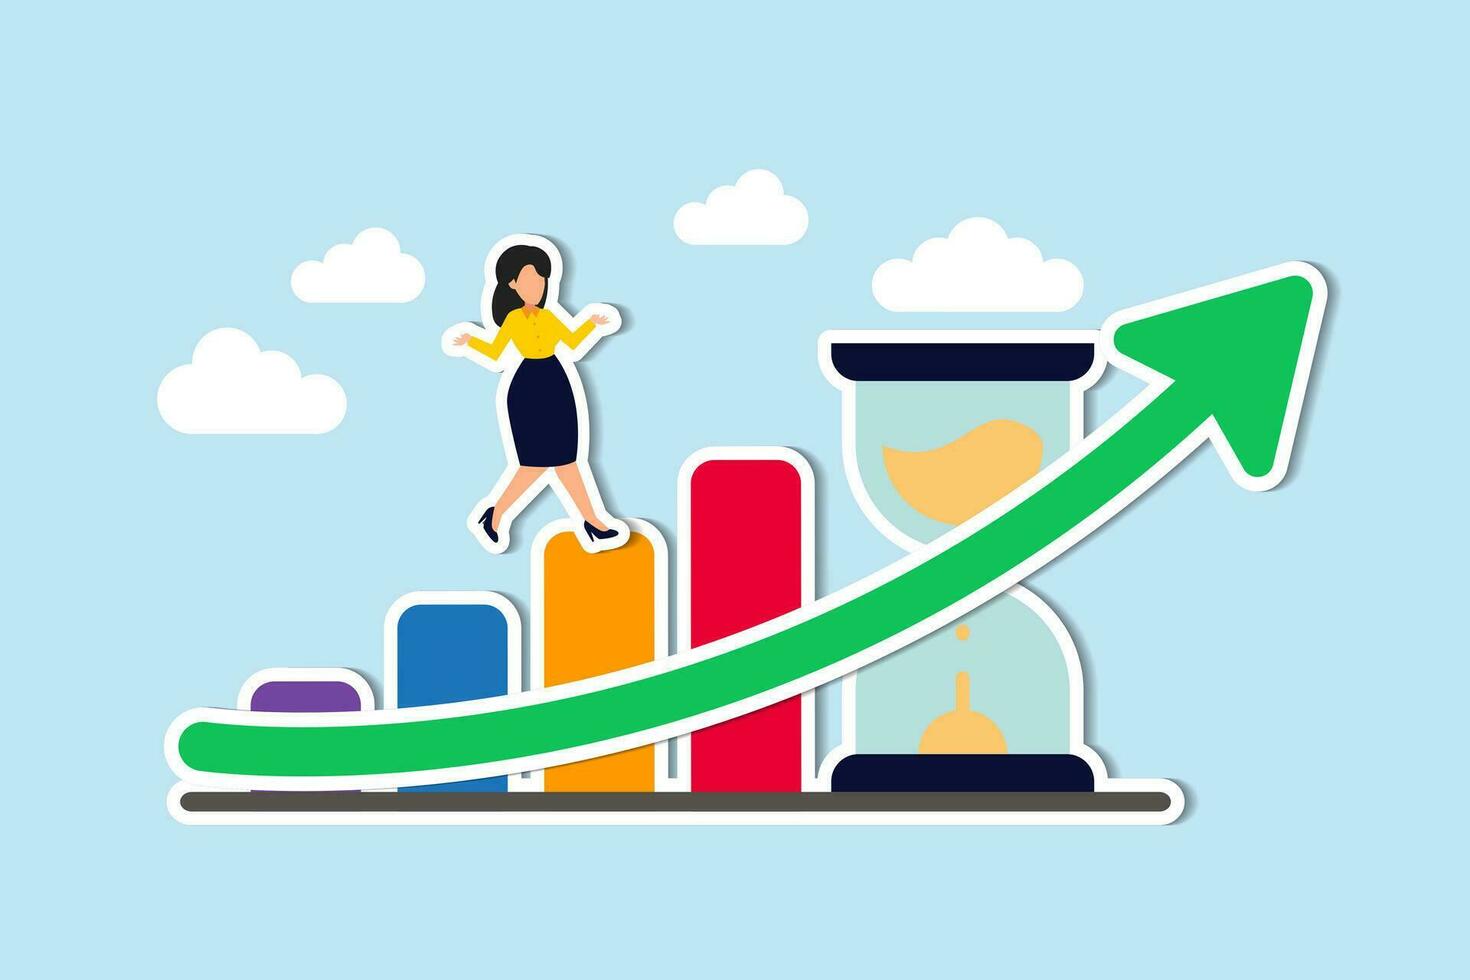 Time value of money, long term investment, compound growth or success growing business, make profit or investment gain concept, woman walk up growth rising up graph with sandglass metaphor of time. vector